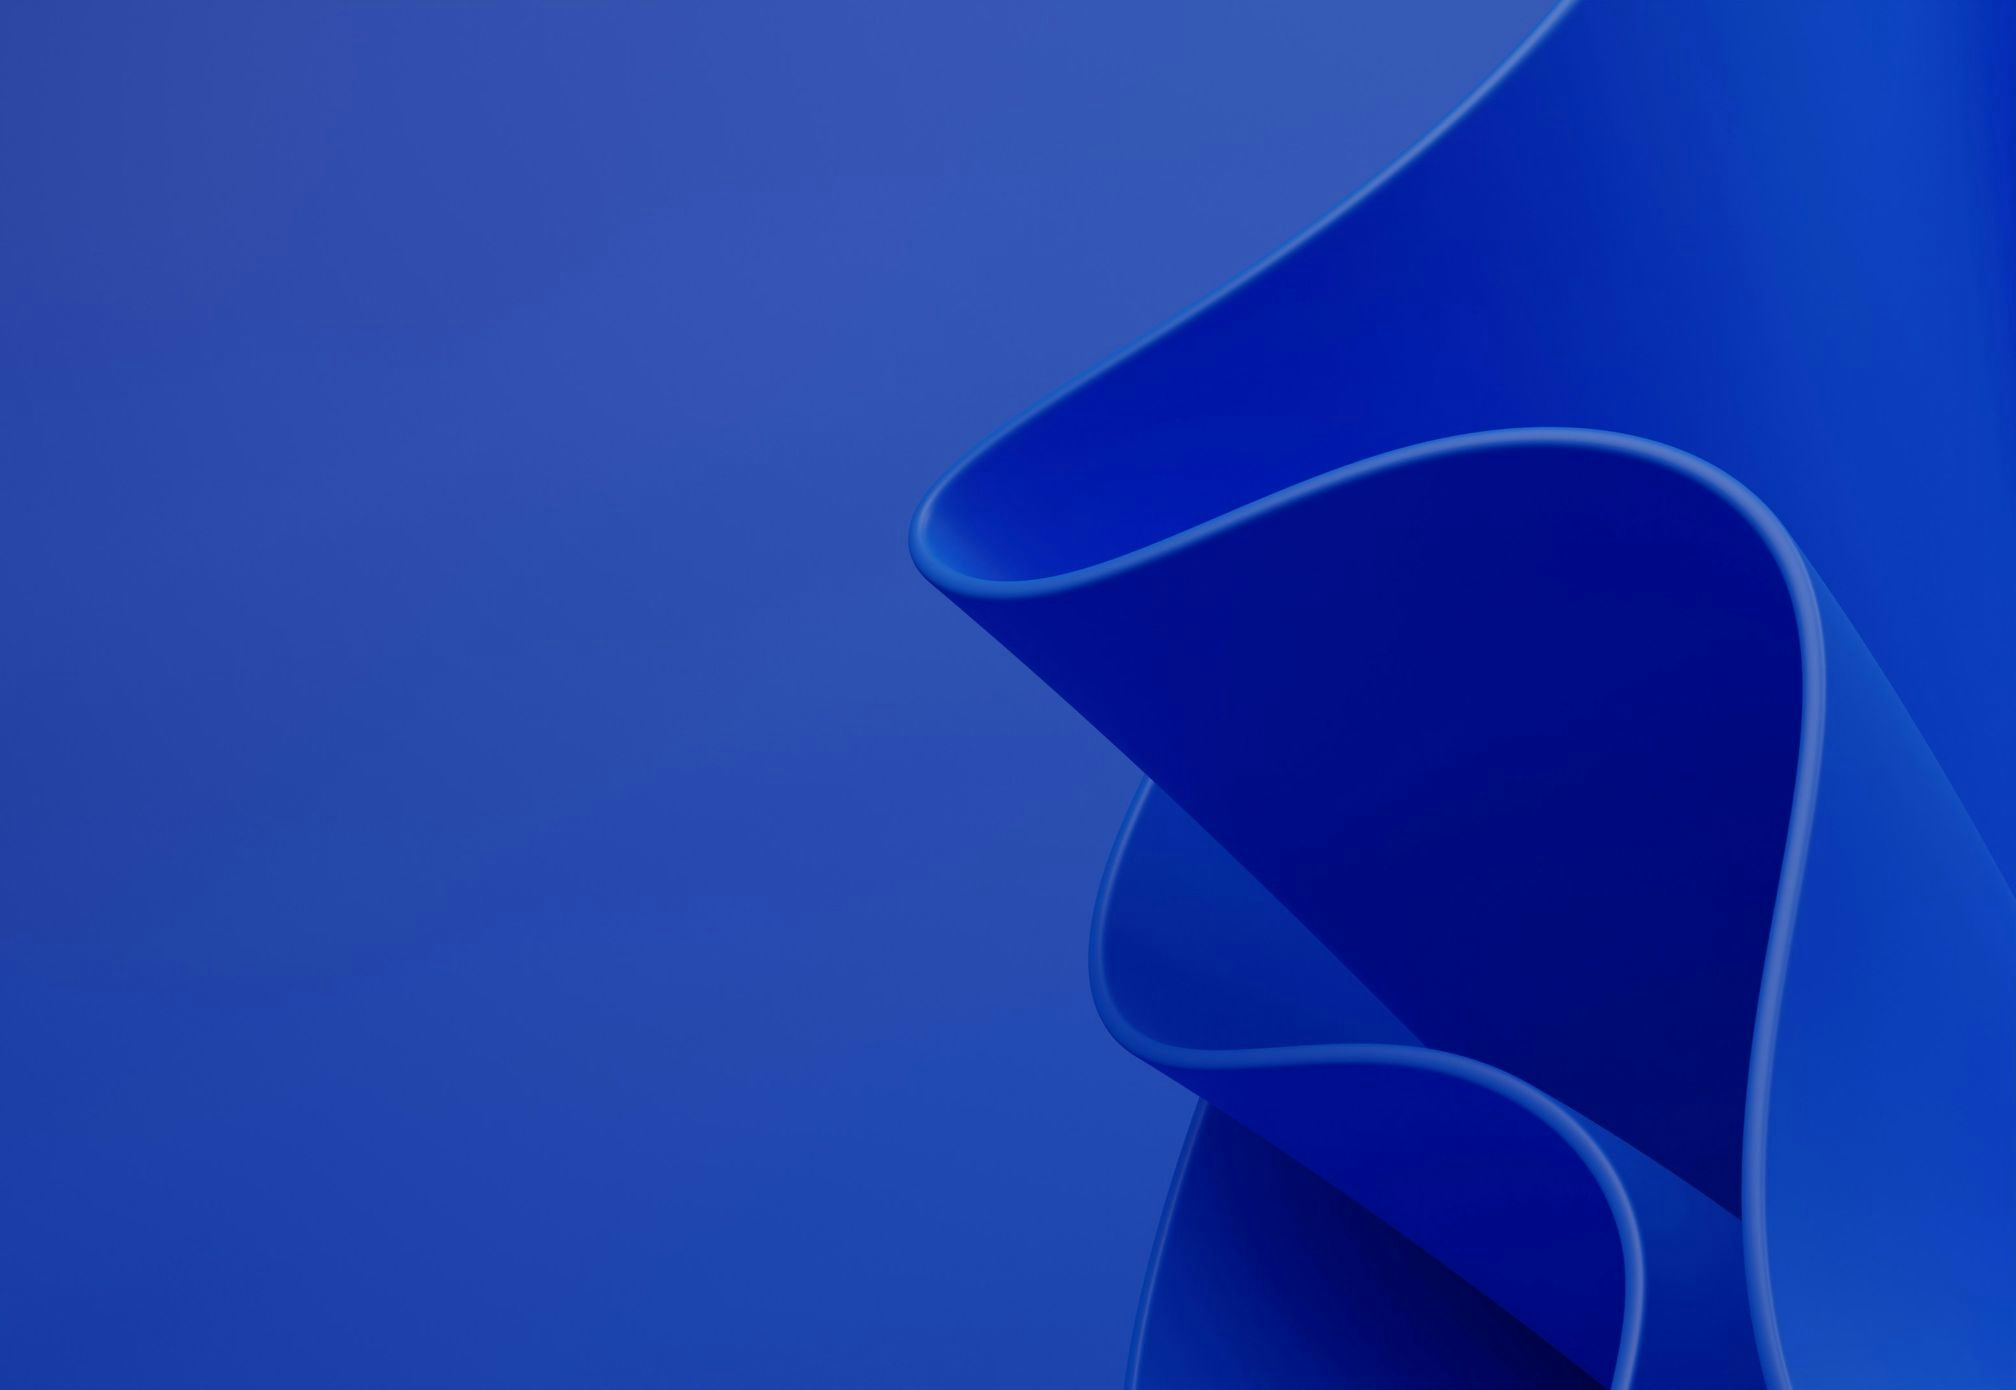 Abstract blue wavy design on a gradient blue background.